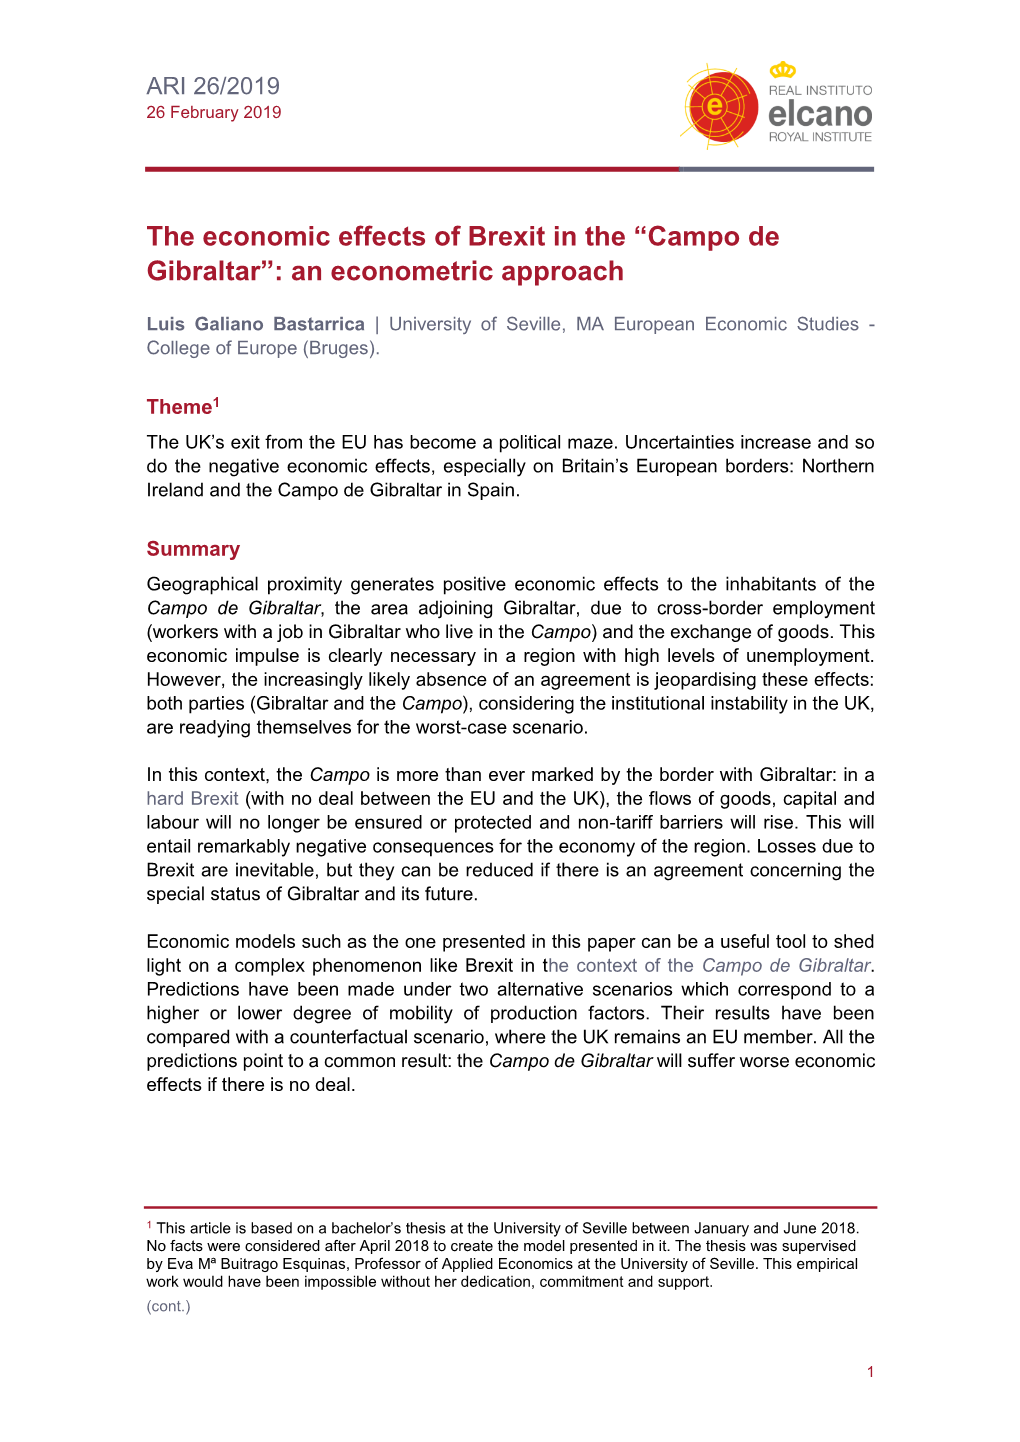 The Economic Effects of Brexit in the “Campo De Gibraltar”: an Econometric Approach